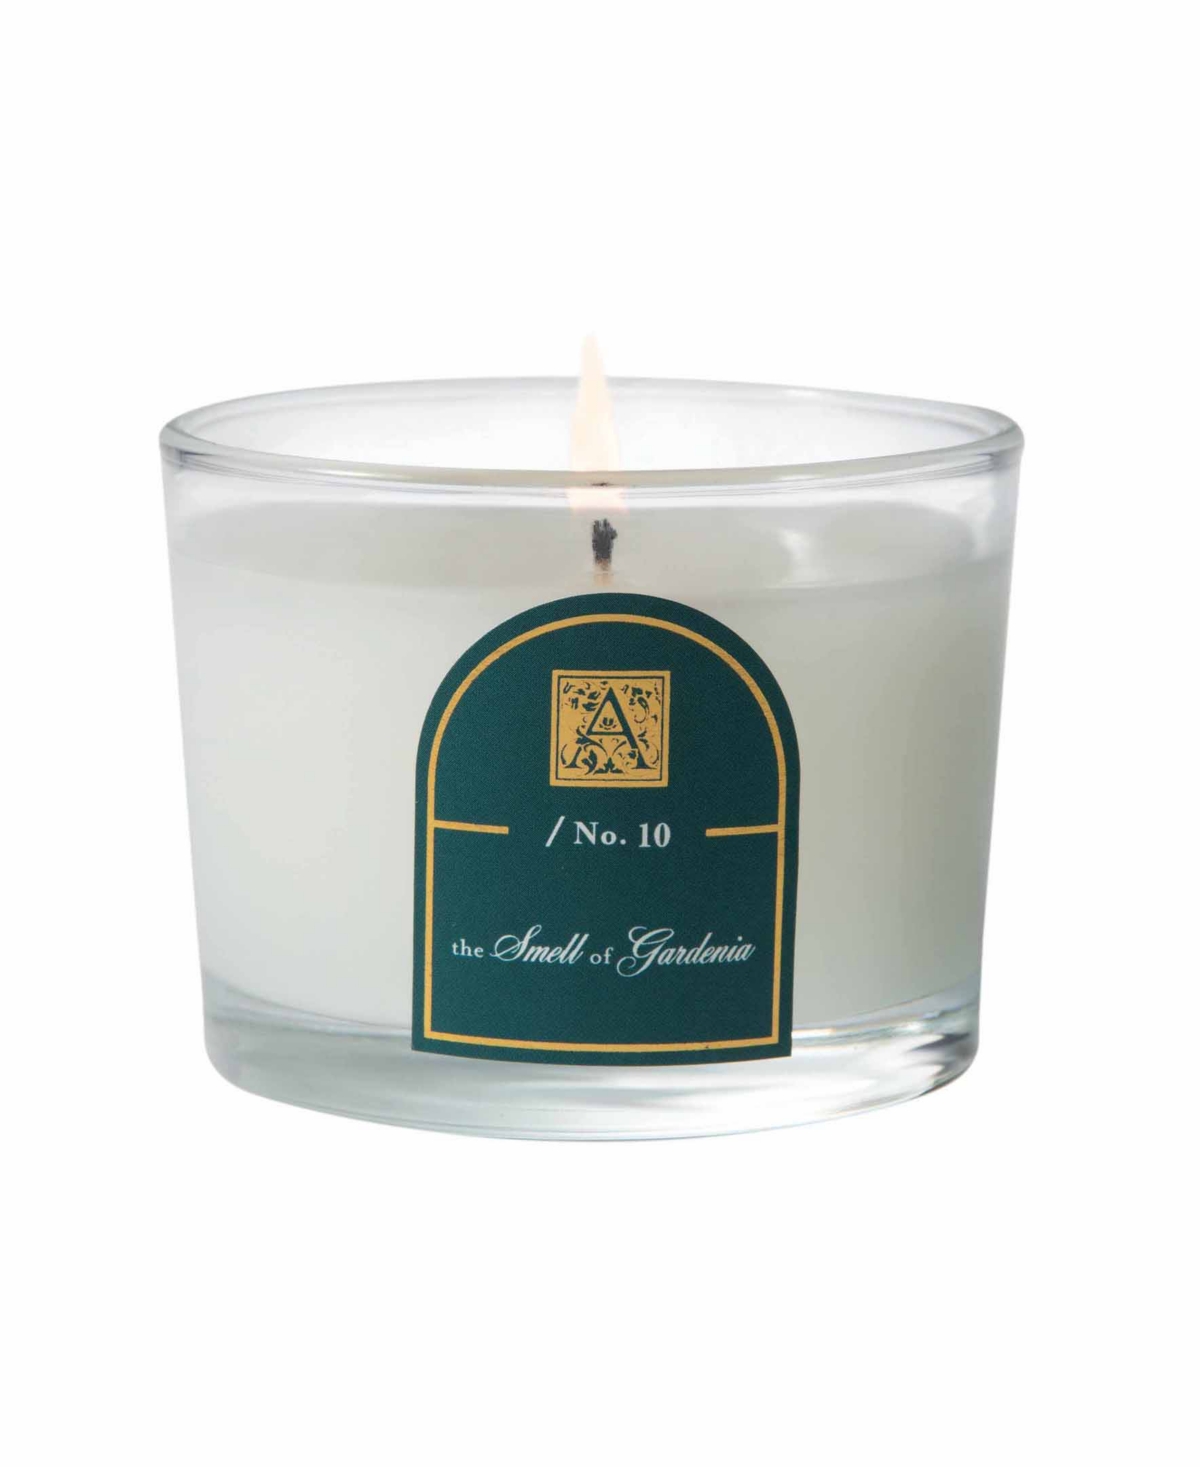 The Smell of Gardenia Petite Tumbler Candle